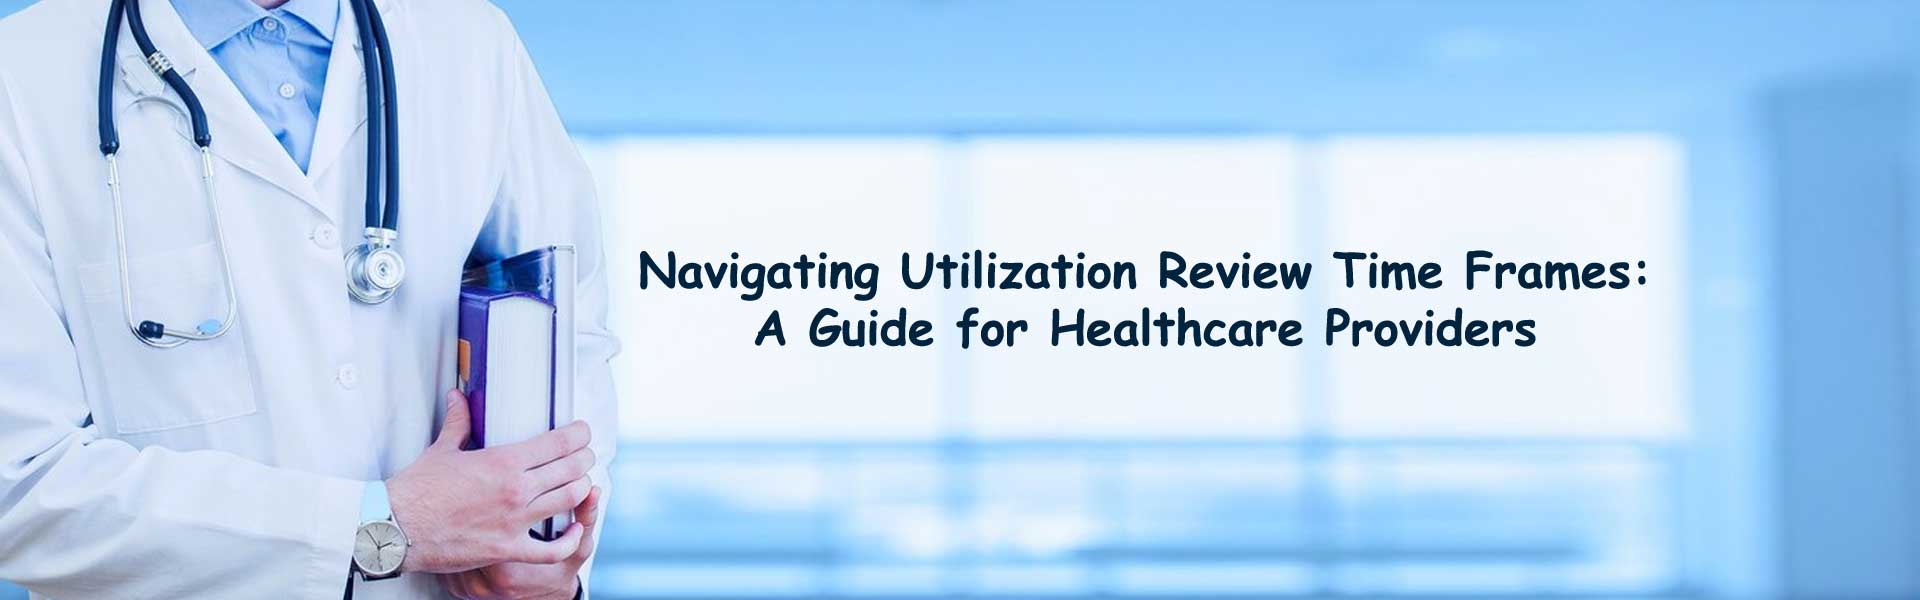 Guide for healthcare providers